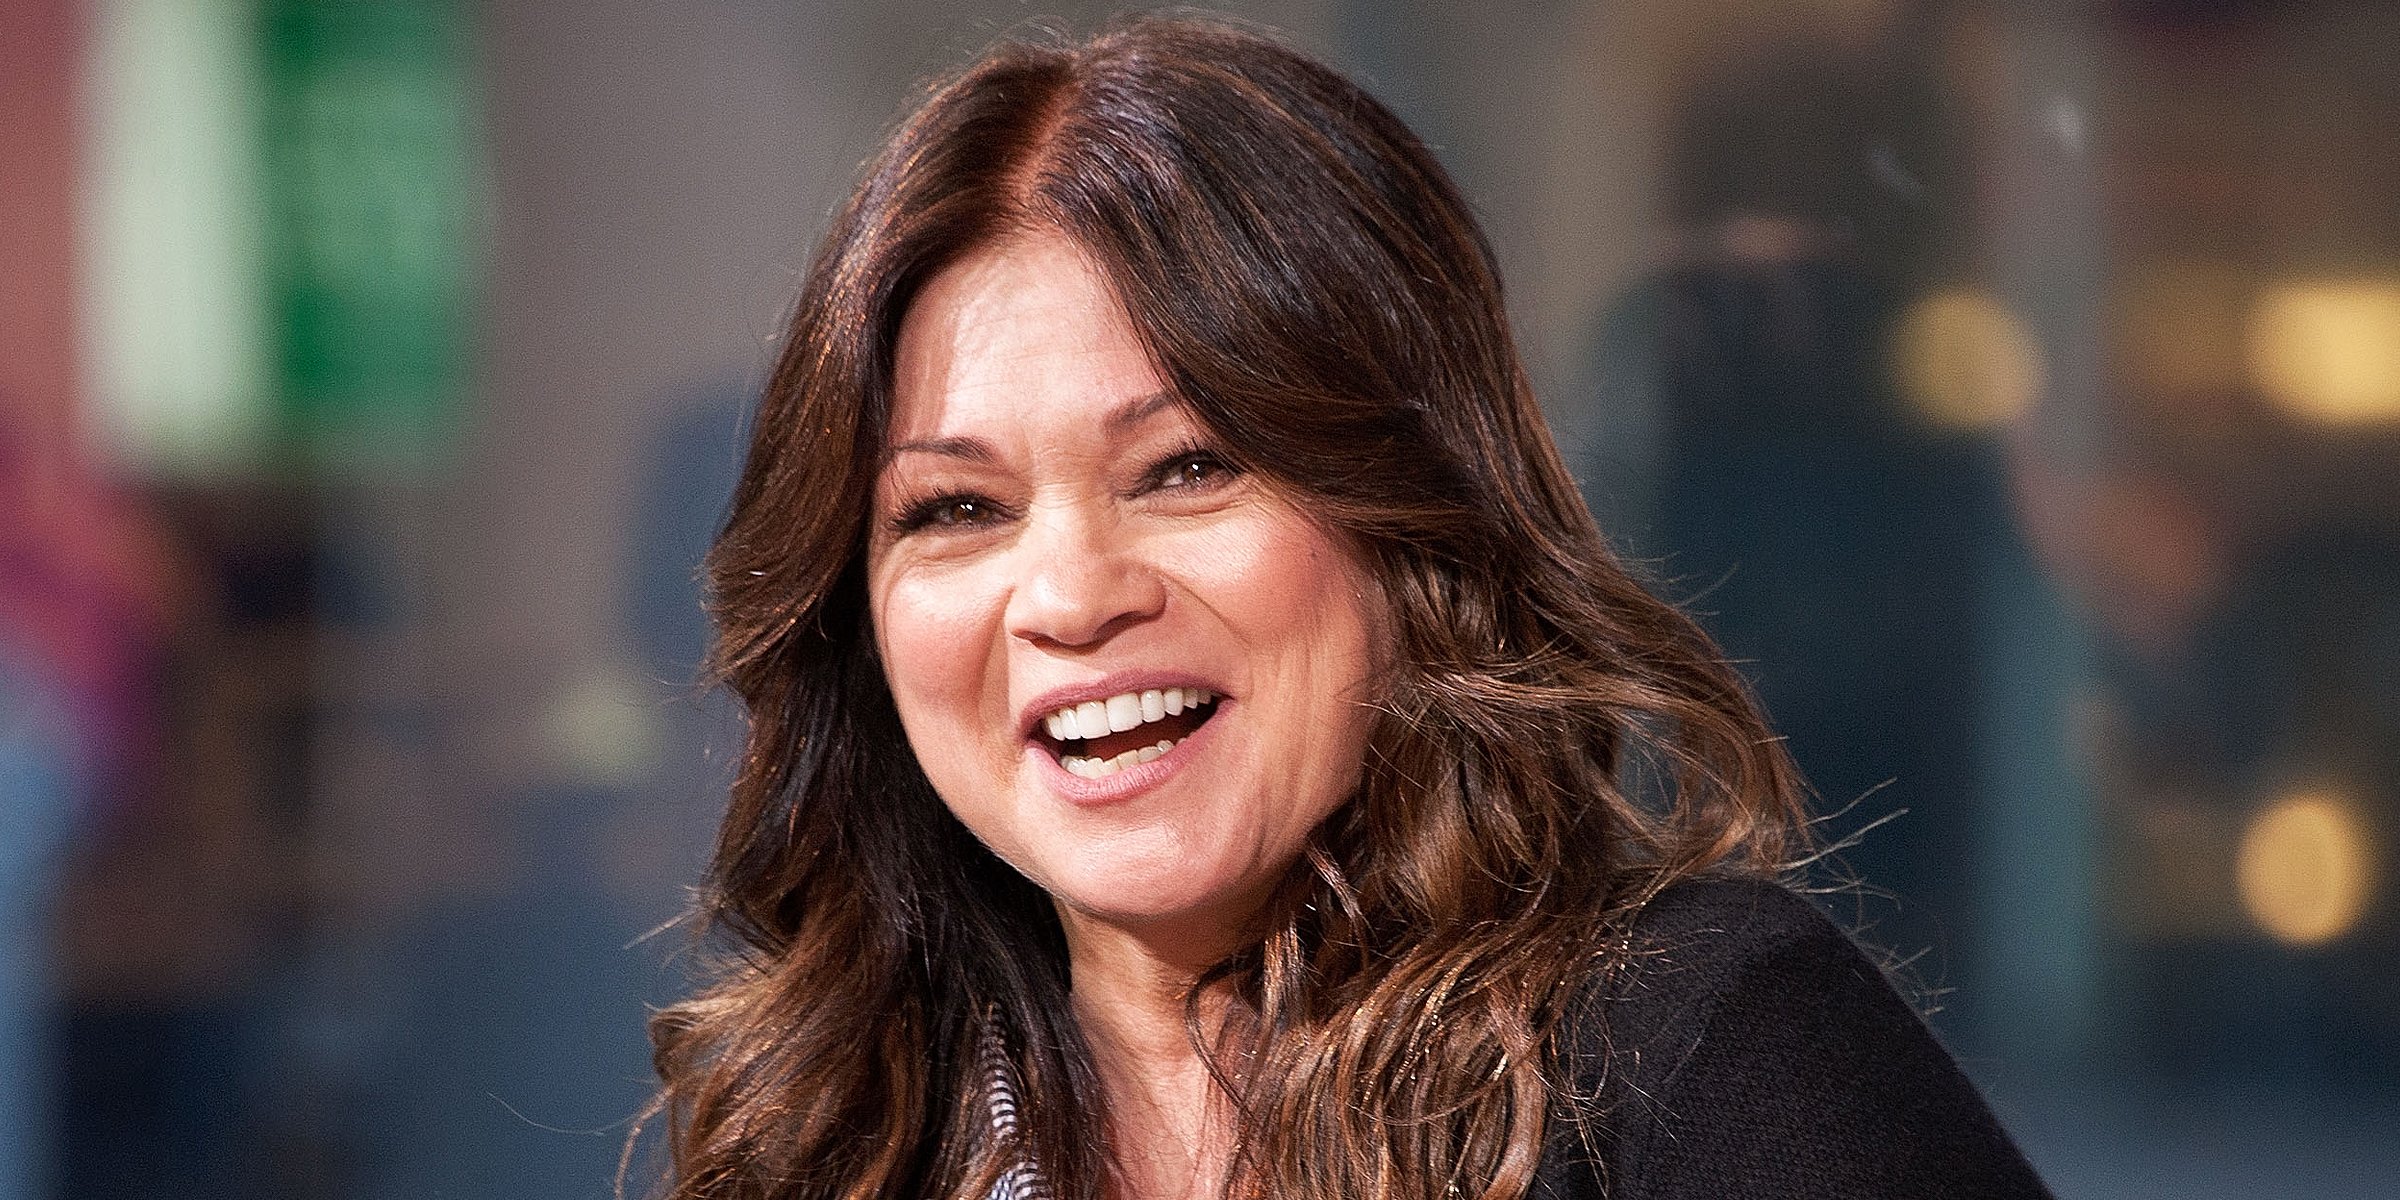 Valerie Bertinelli. | Source: Getty Images